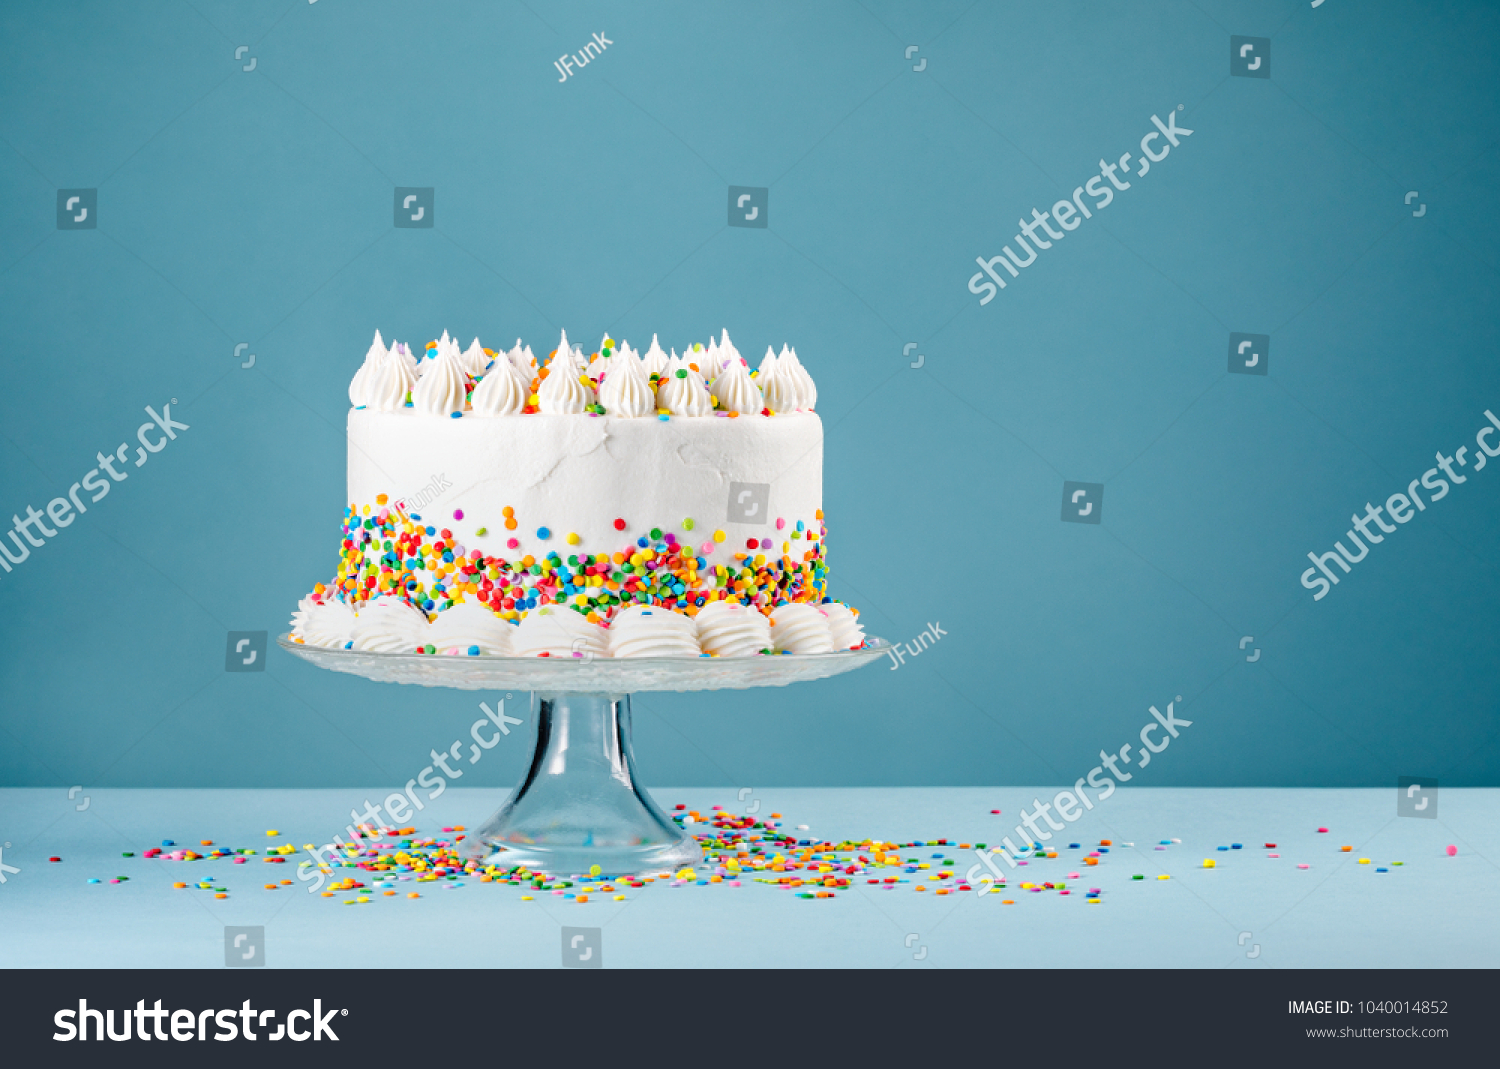 White Birthday cake with colorful Sprinkles over a blue background. #1040014852